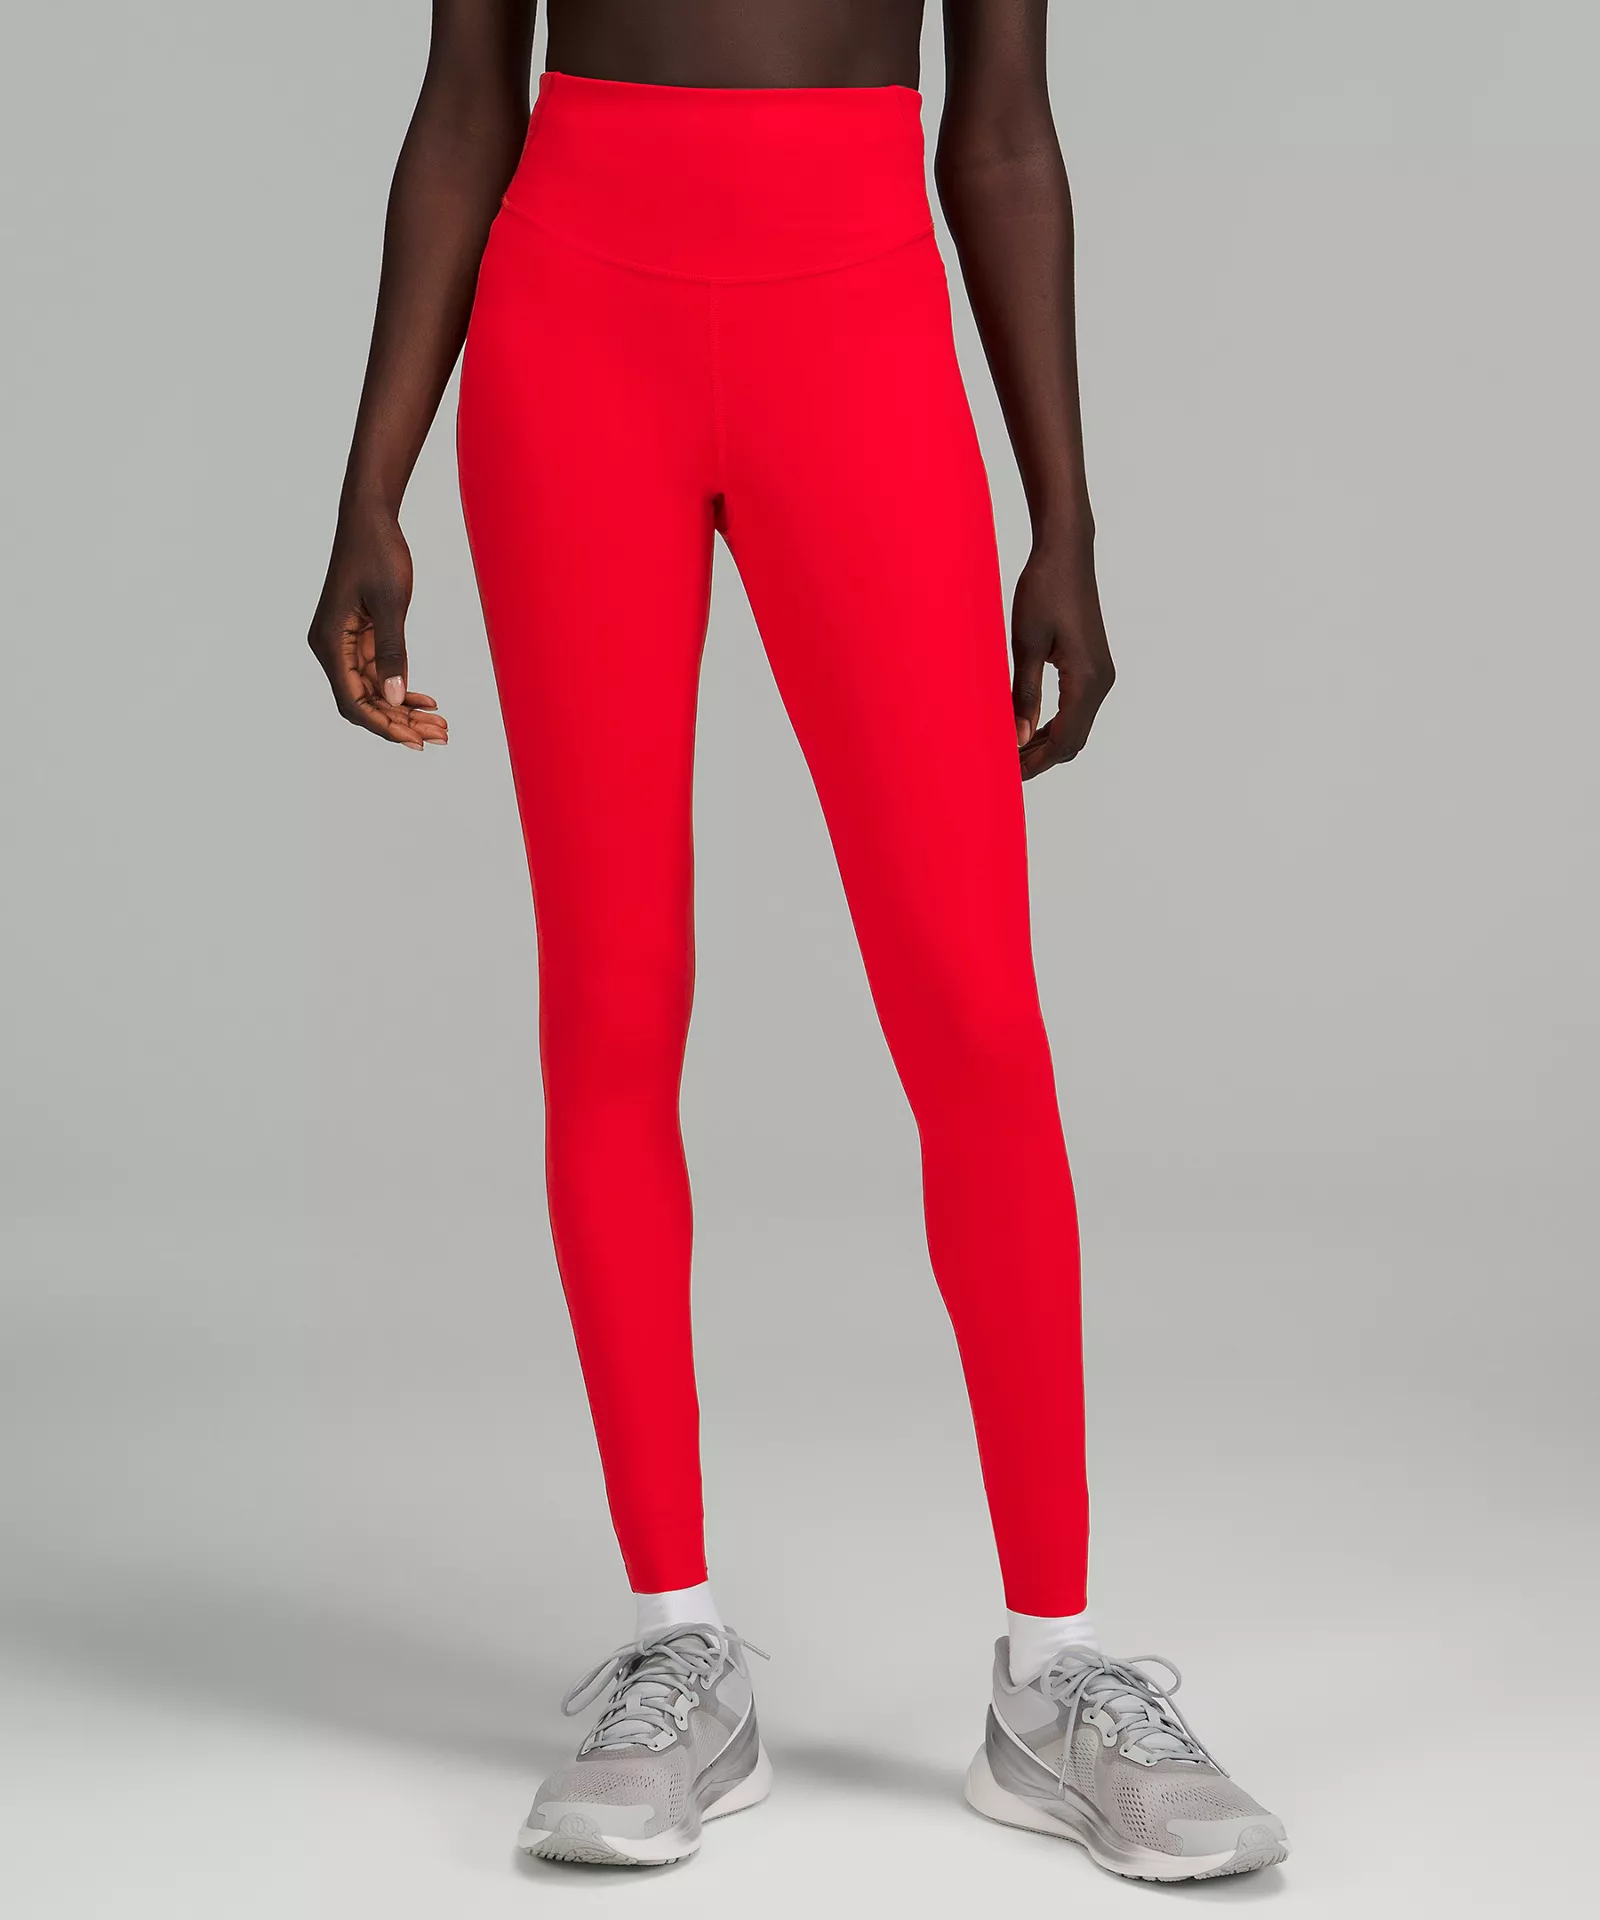 6 Reasons to Buy/Not to Buy LuluLemon Base Pace High-Rise Tight